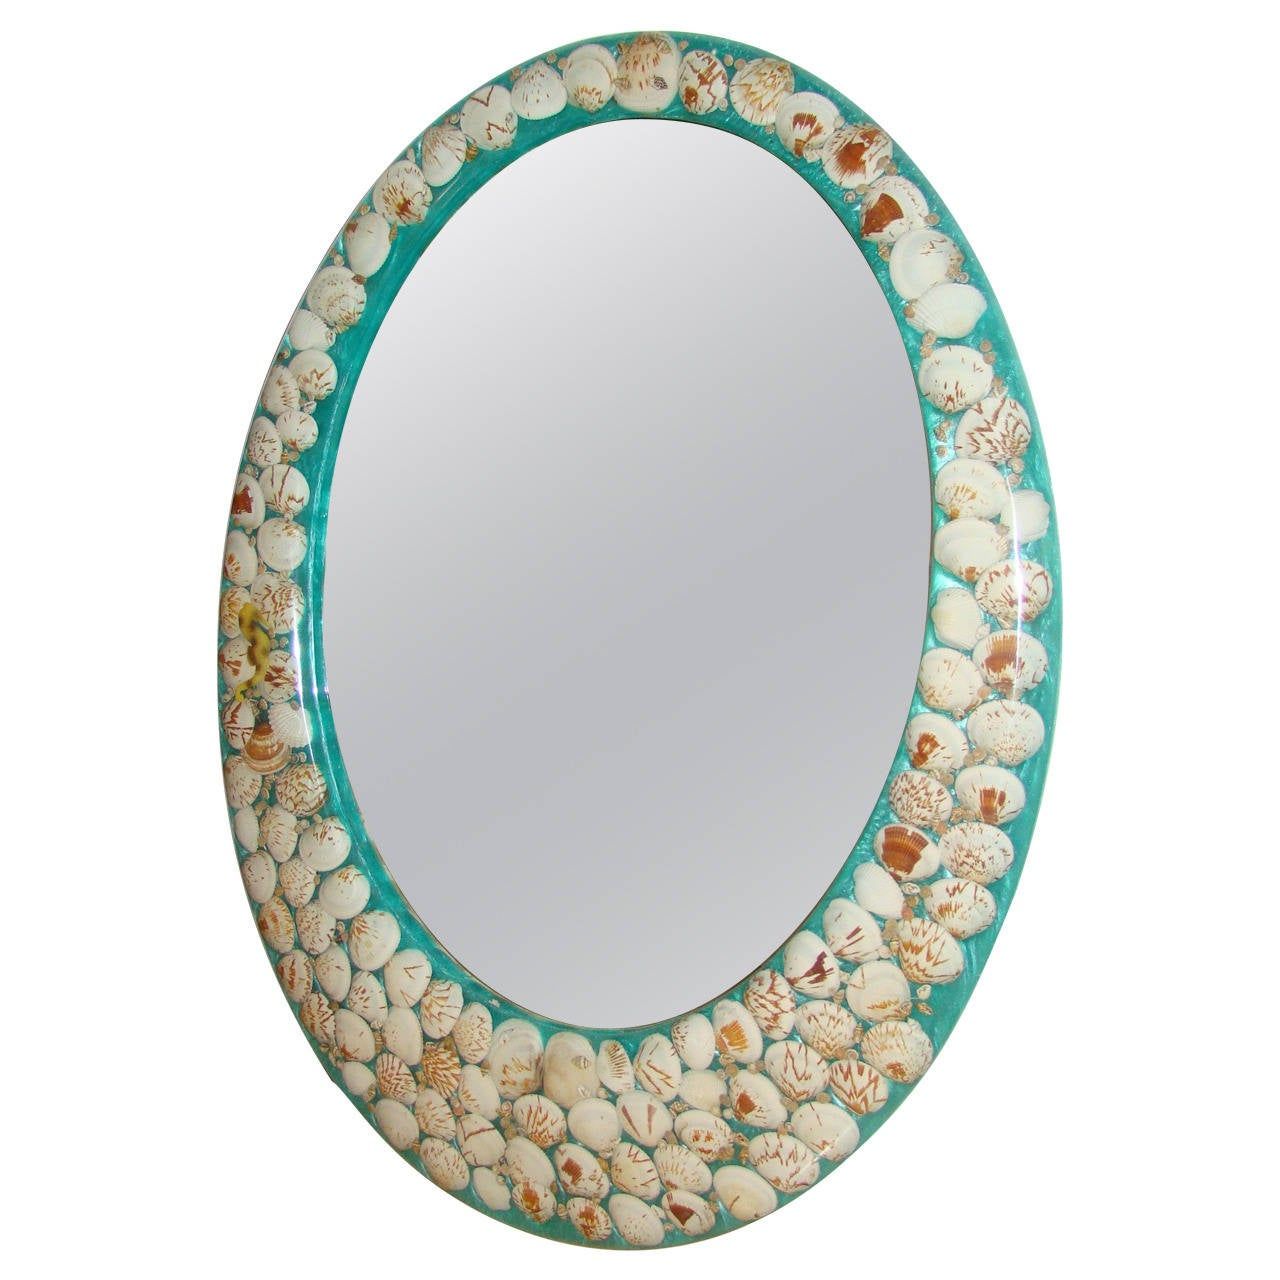 Lucite Sea Shell Embedded Oval Wall Hanging Mirror At 1stdibs Pertaining To Shell Wall Mirrors (View 2 of 15)